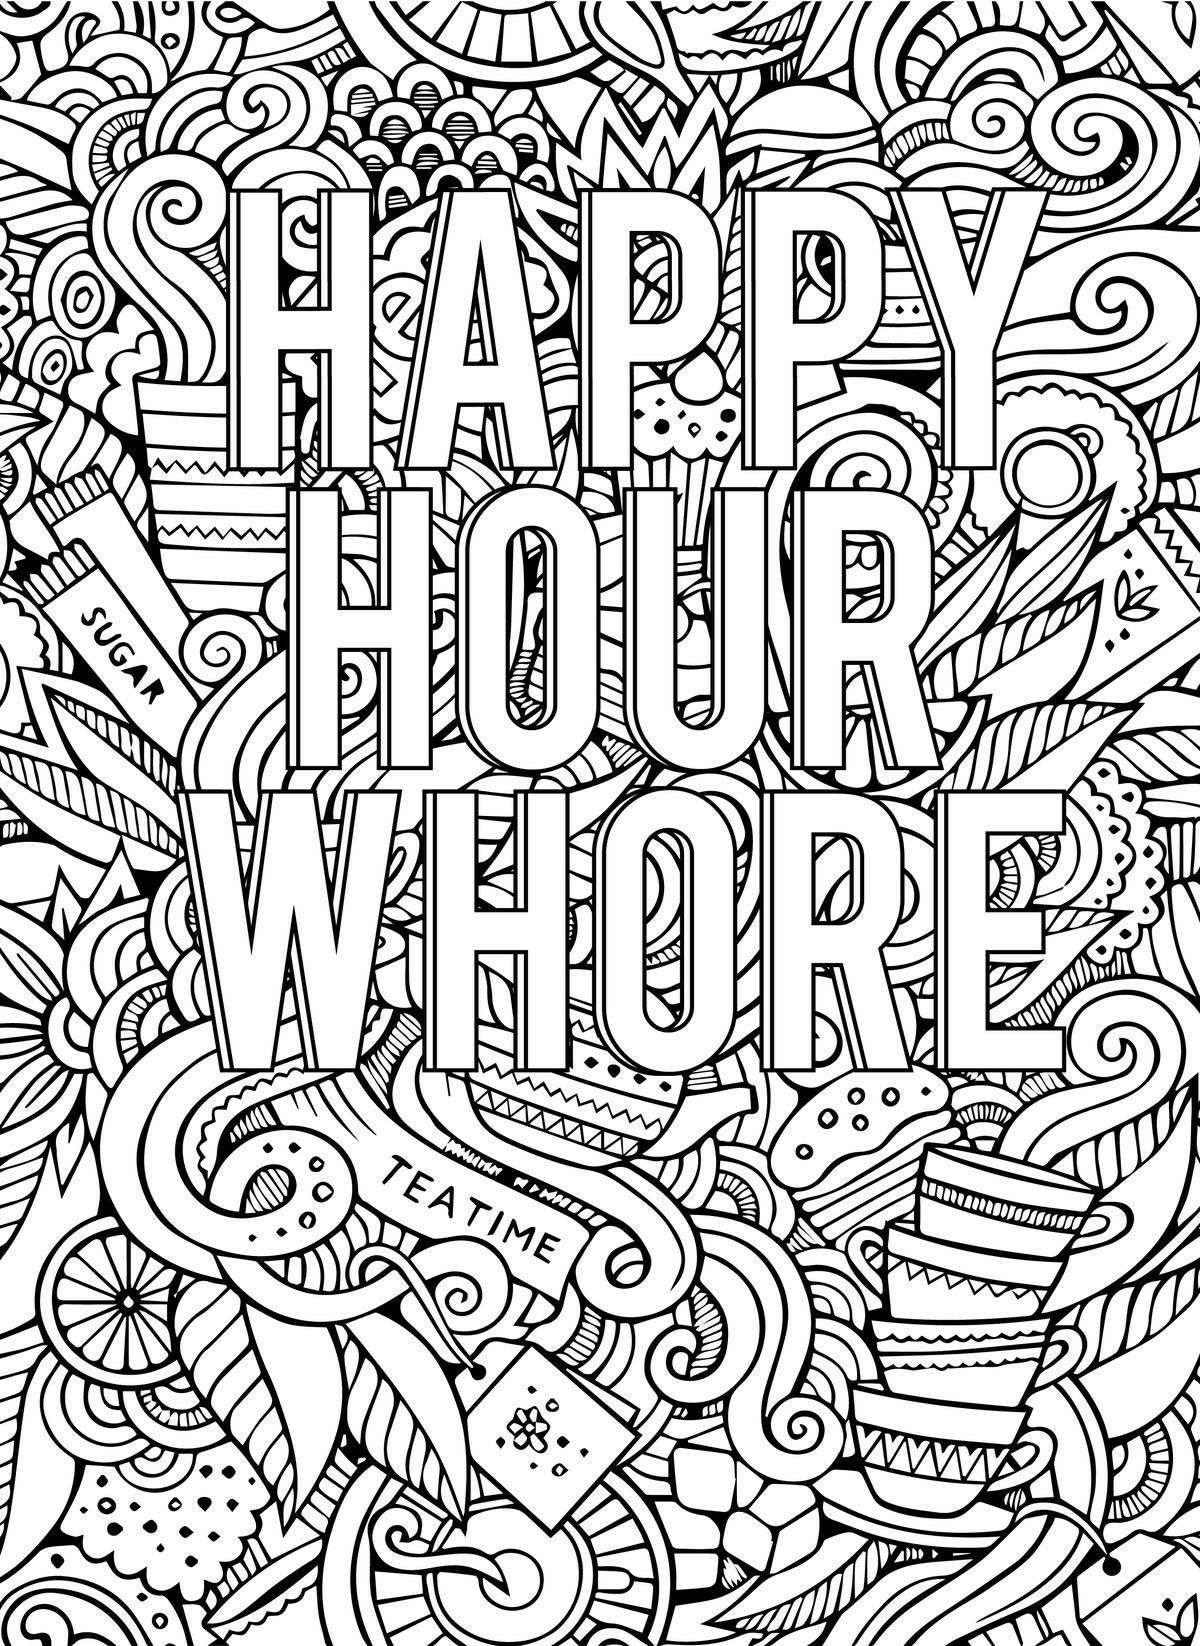 Pin By Novell Irene Cano On colorin Words Coloring Book Swear Word 